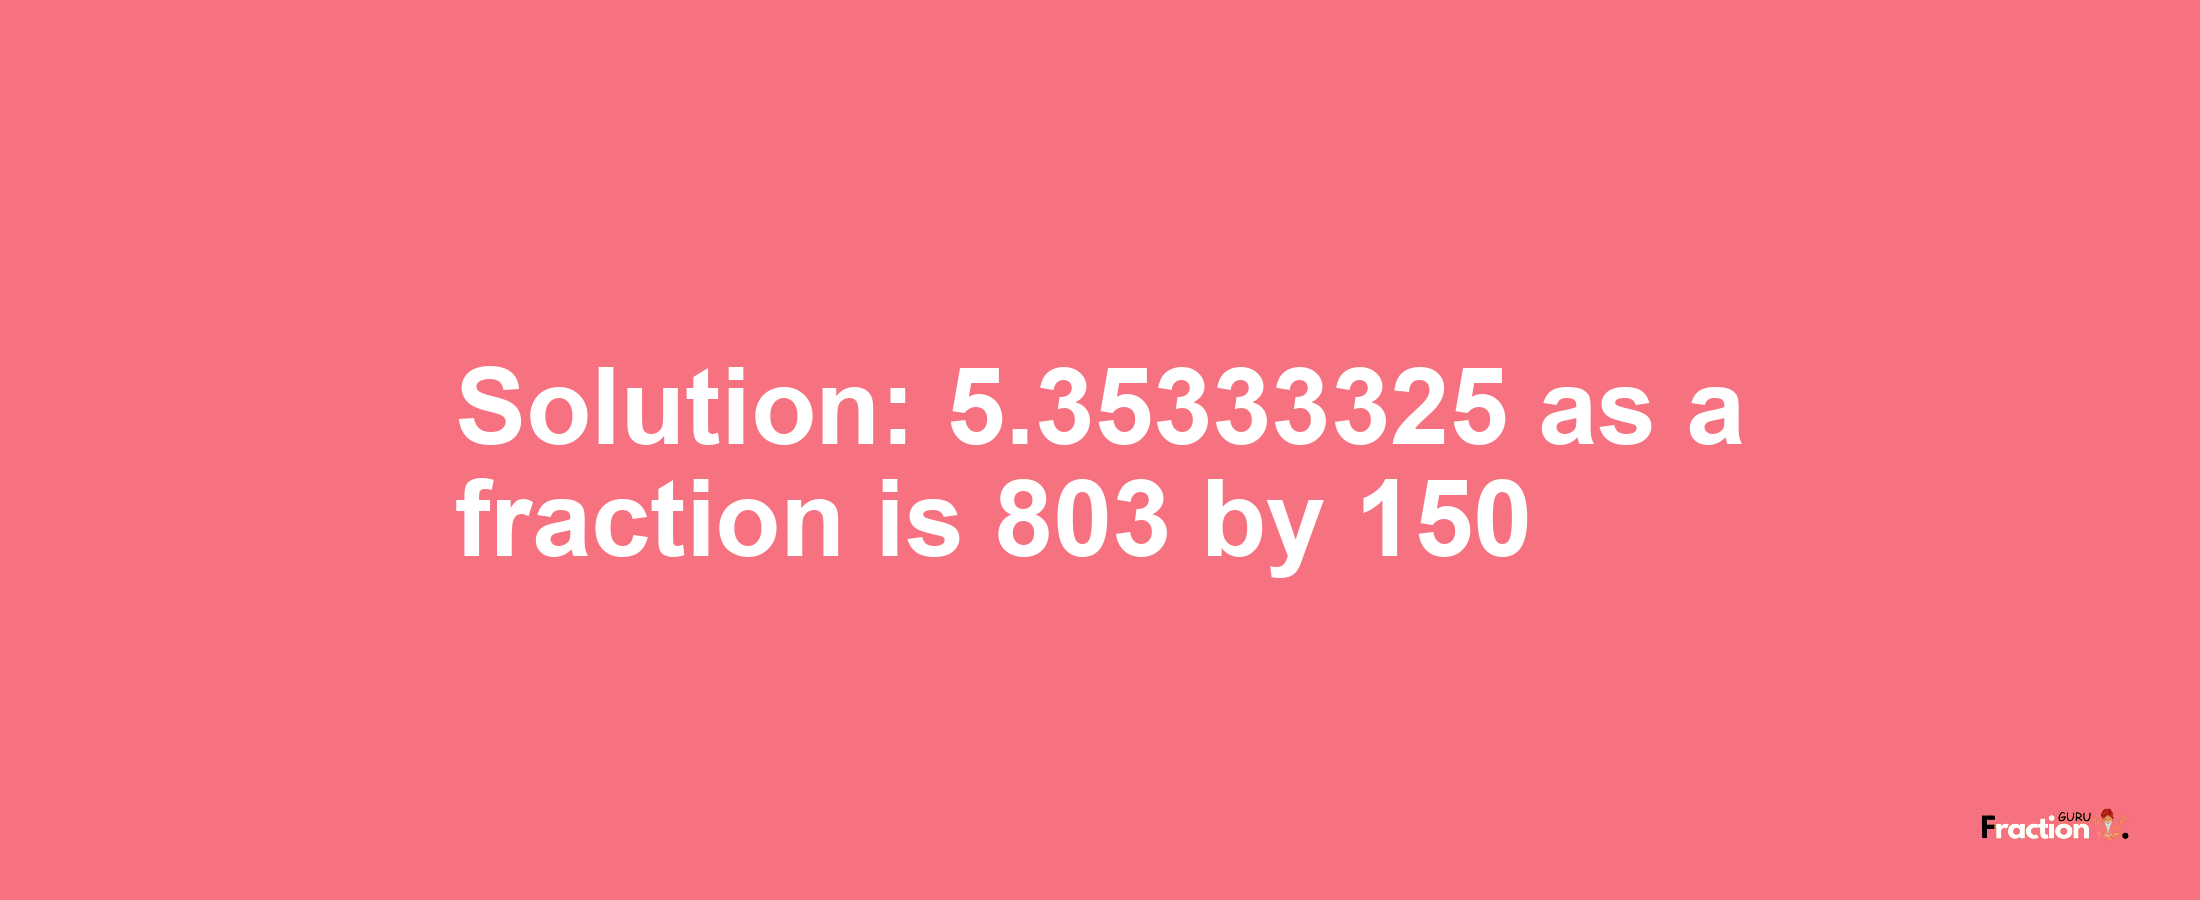 Solution:5.35333325 as a fraction is 803/150